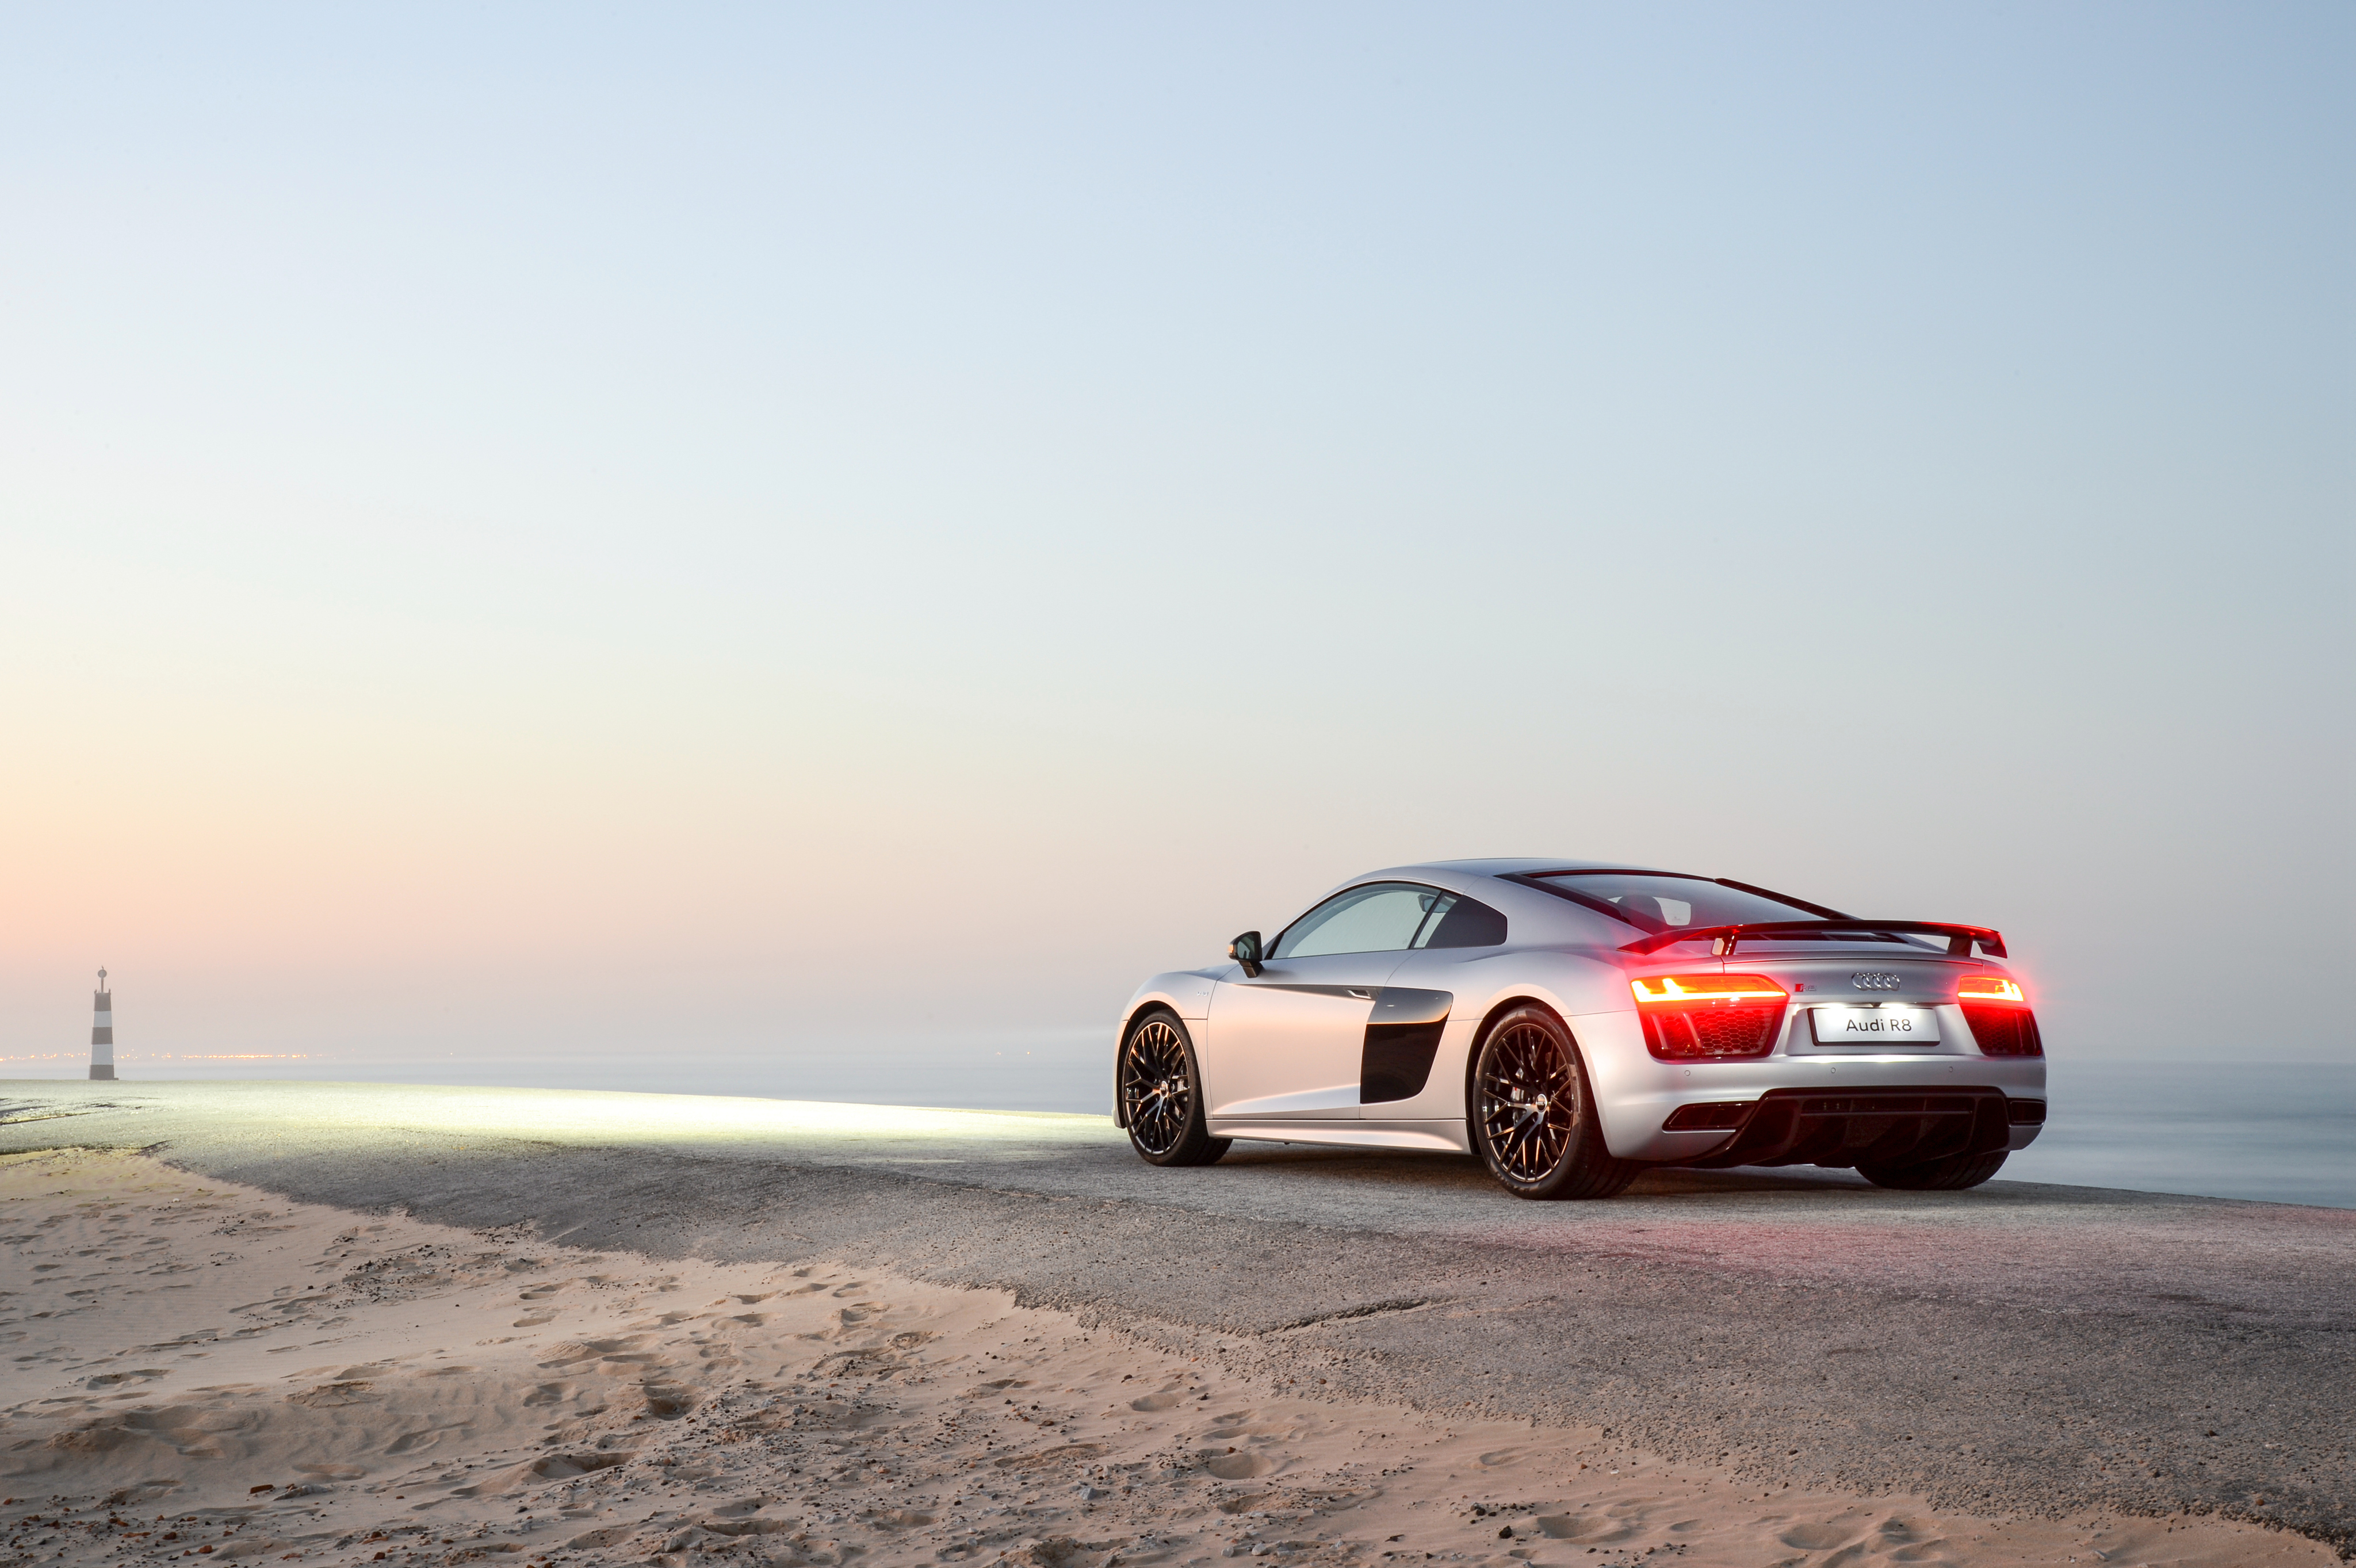 75548 download wallpaper audi, cars, road, back view, rear view, r8 screensavers and pictures for free